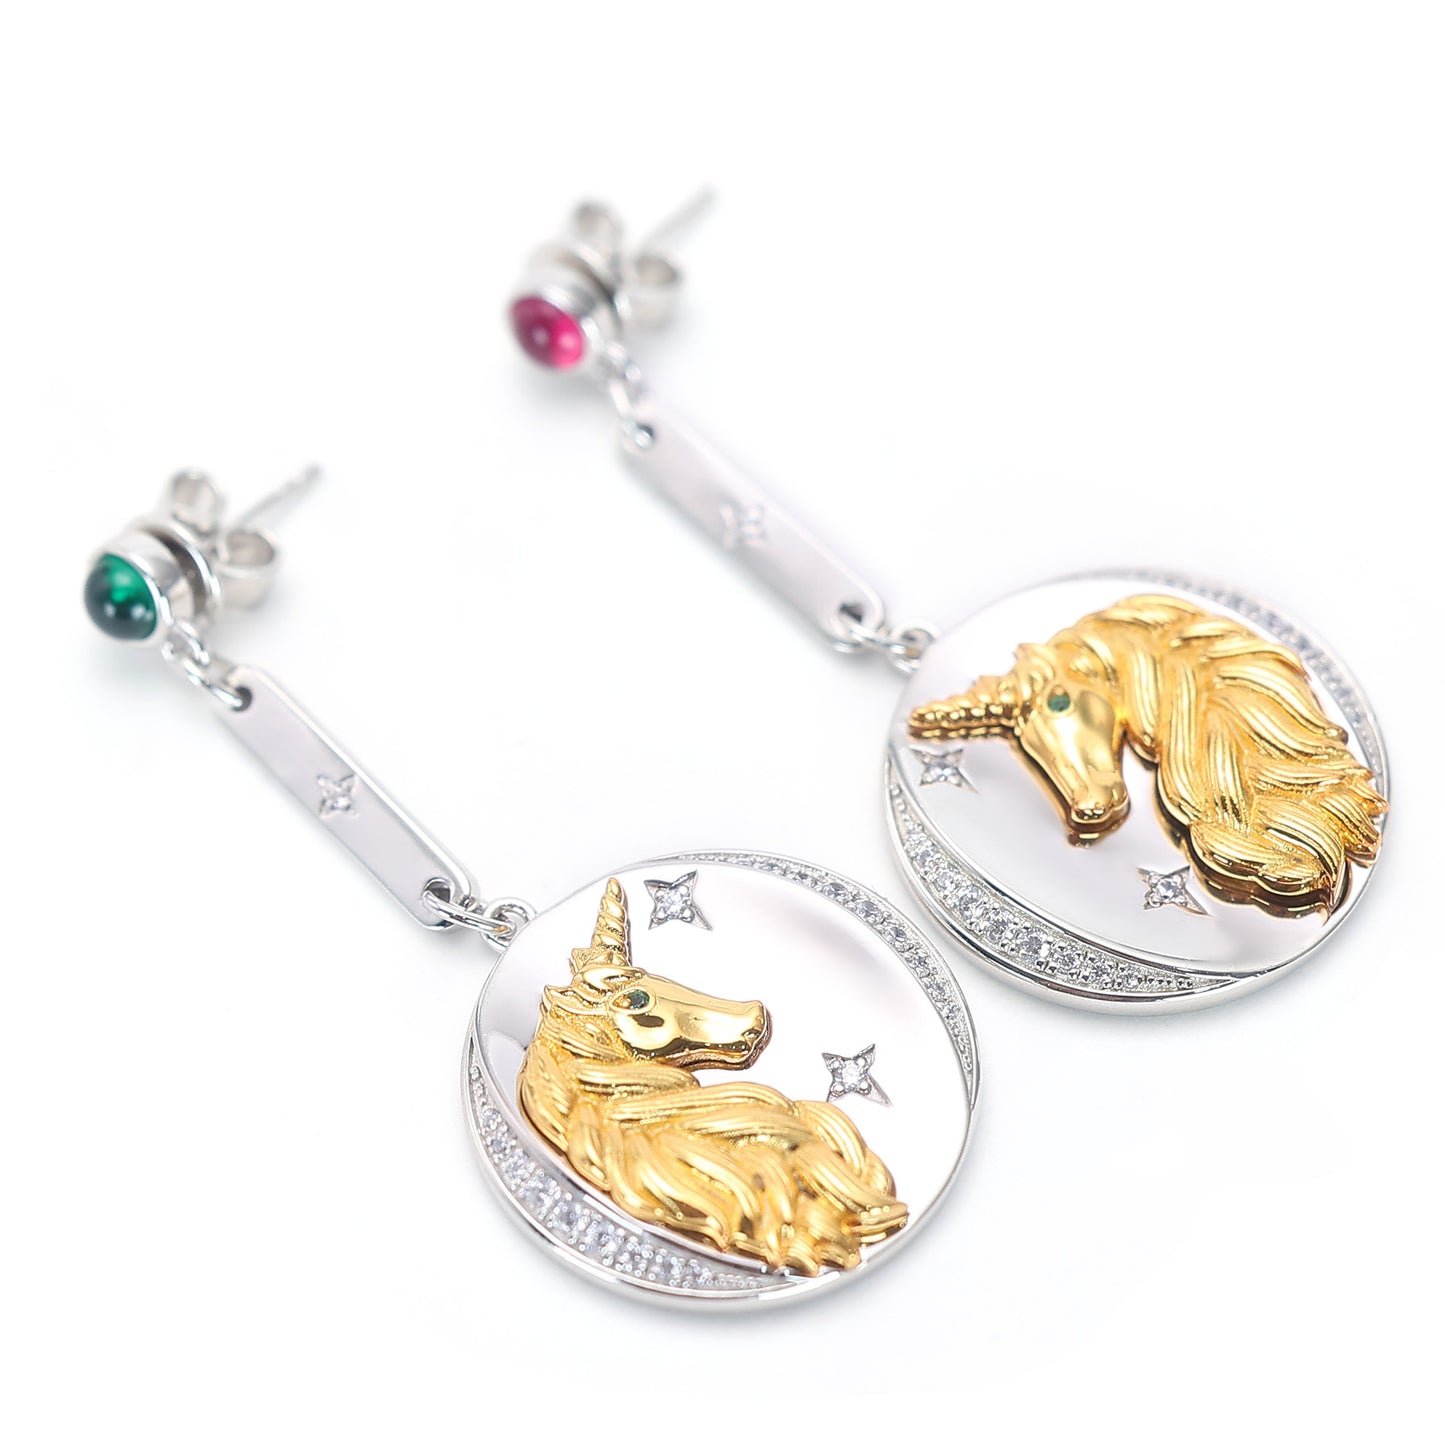 Micro-setting ancient coins selection Lab created stones The unicorn earrings, sterling silver. Double platting.